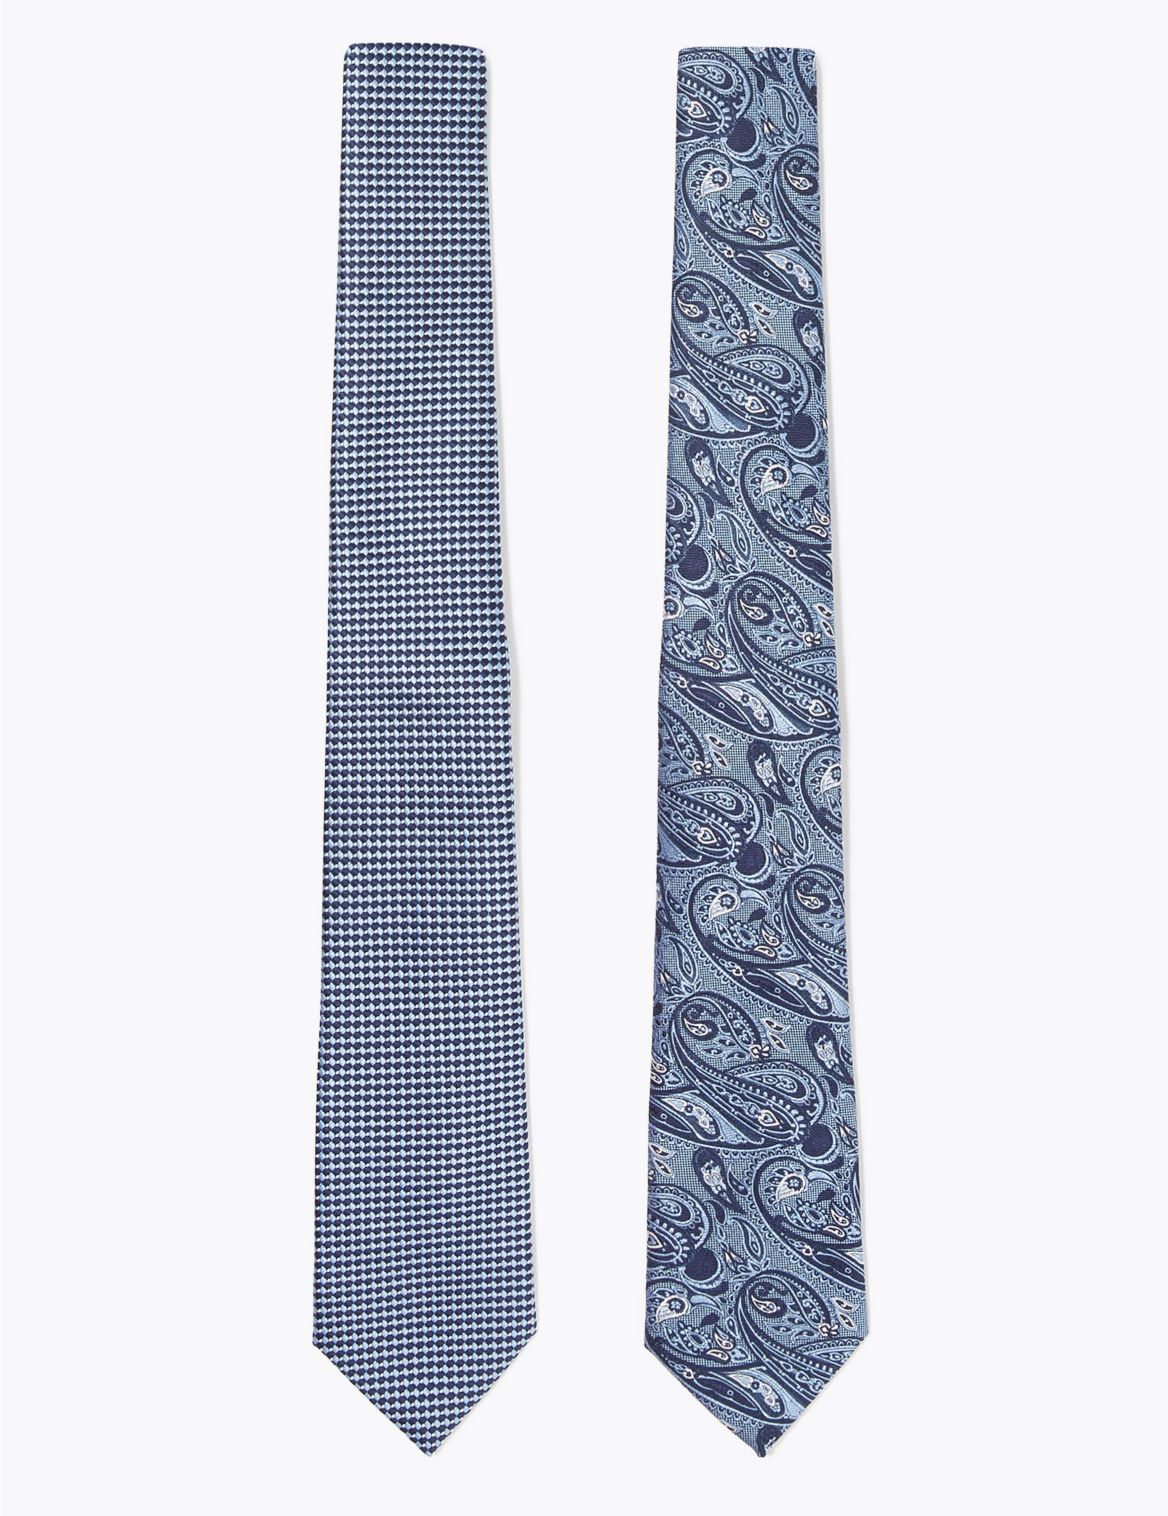 2 Pack Slim Woven Check & Paisley Ties blue